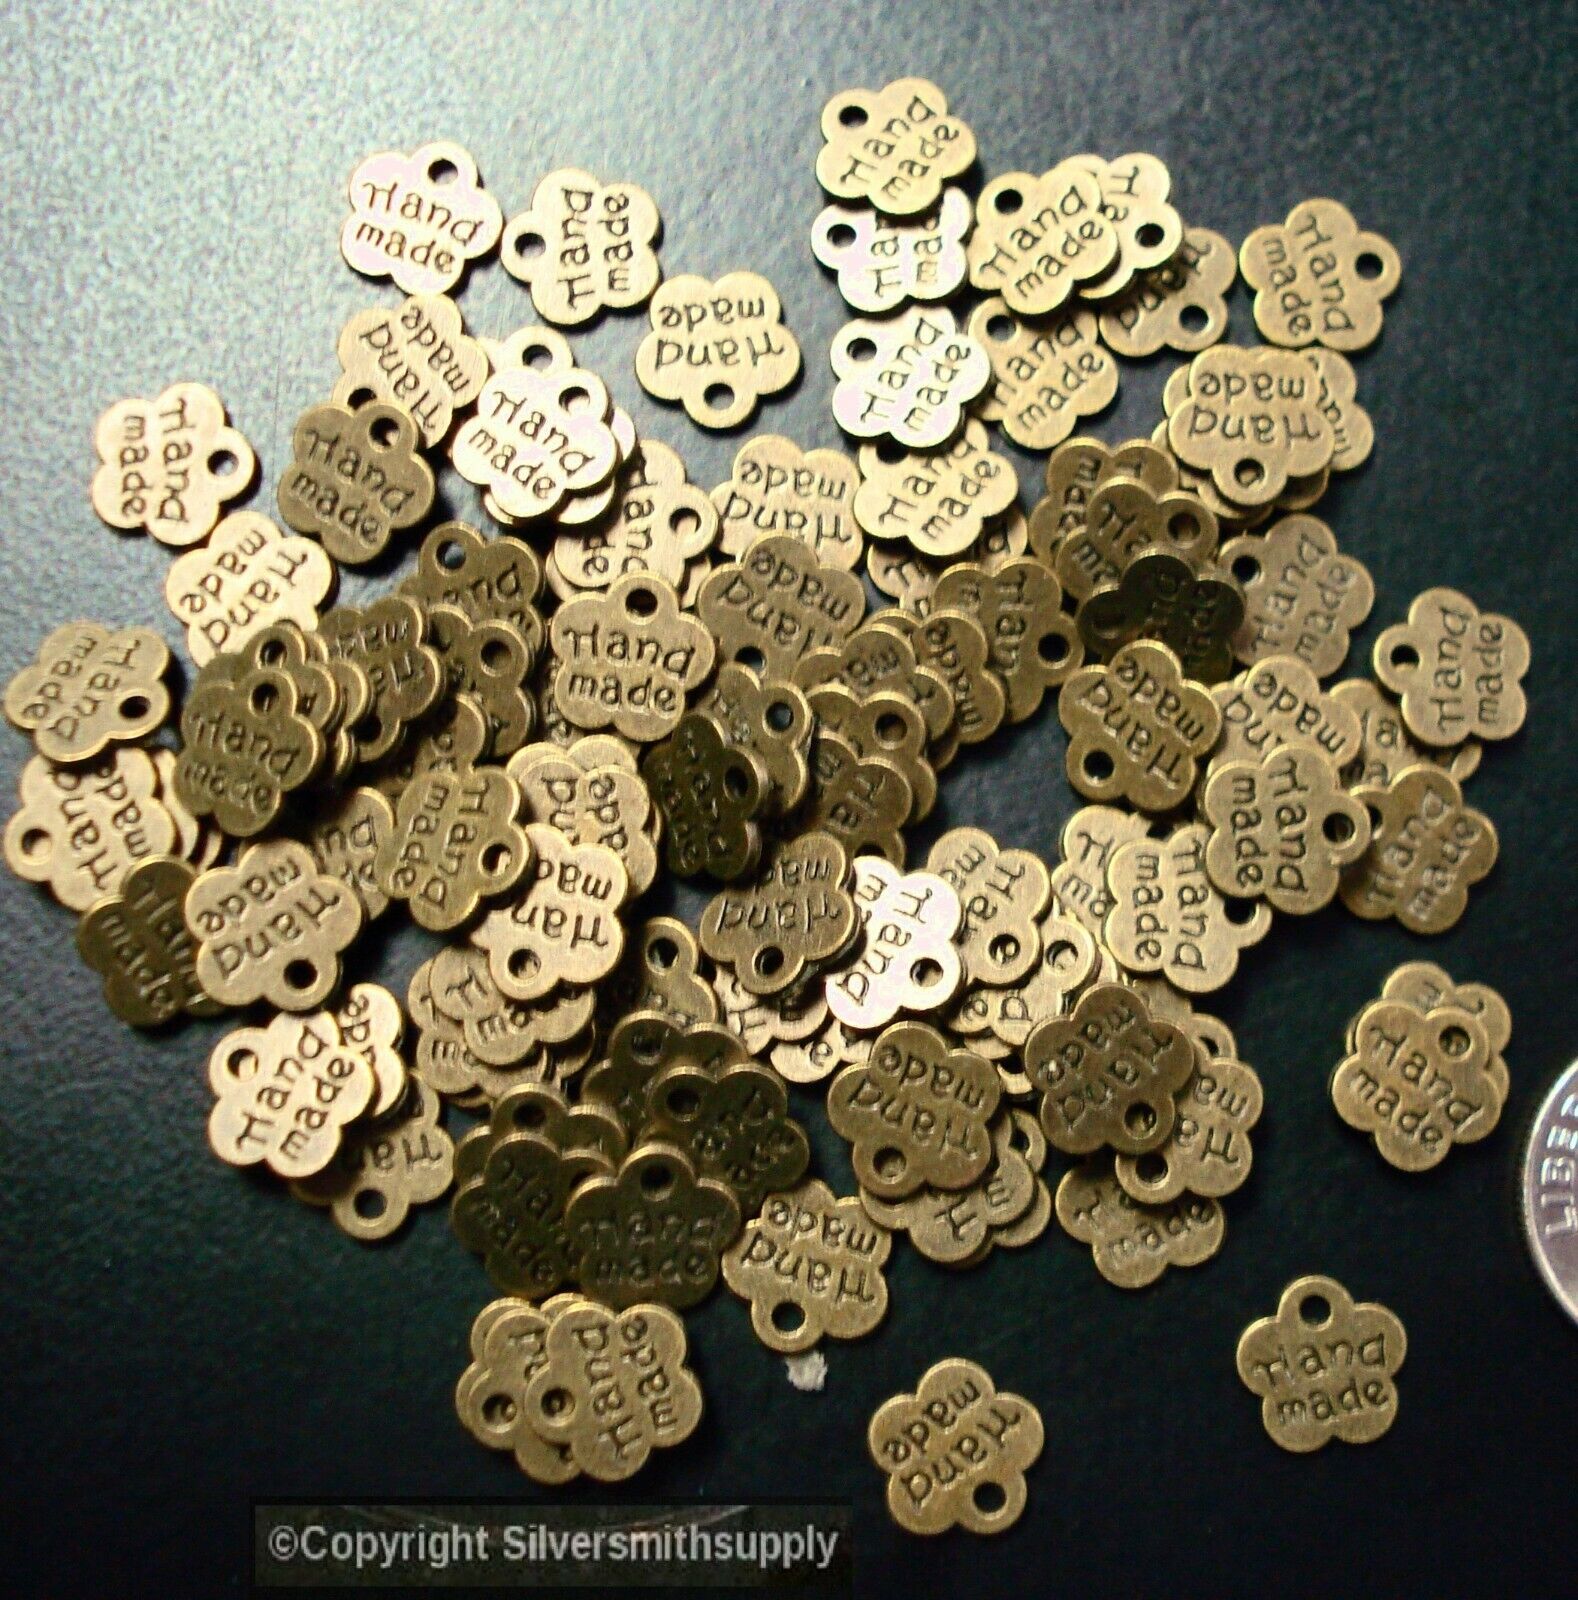 100 Jewelry tags "handmade" 9mm antique bronze plated signature tags CFP074  Silversmithsupply.com